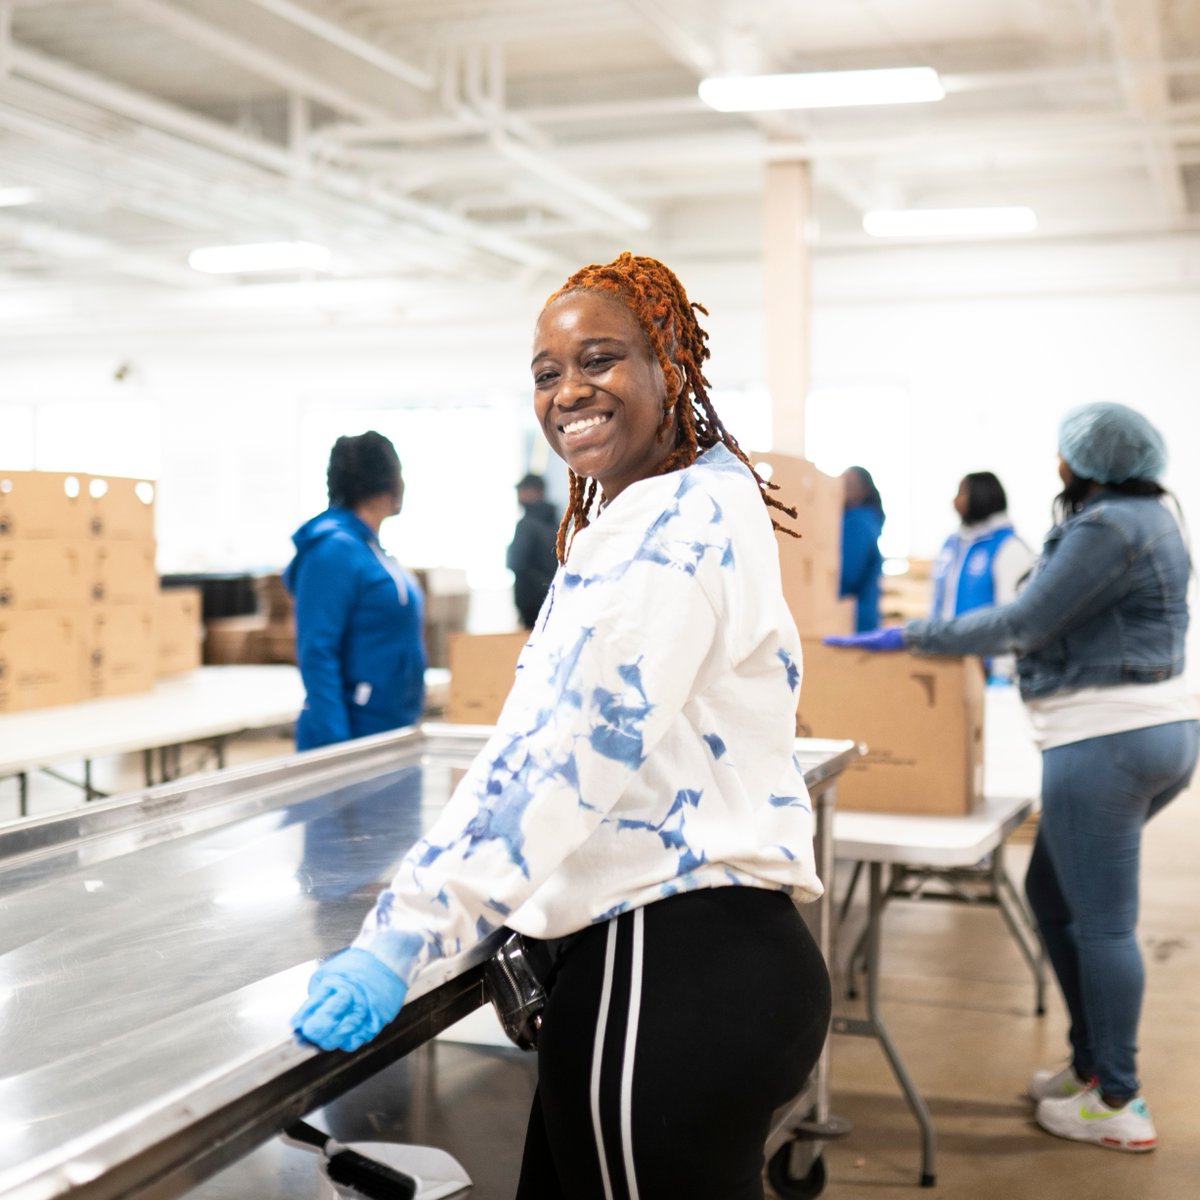 Join us in our mission to #EndHungerNow by volunteering! We have a variety of volunteer opportunities, including repack sessions and delivering fresh produce. Visit bit.ly/3Eh3ibT to learn more!